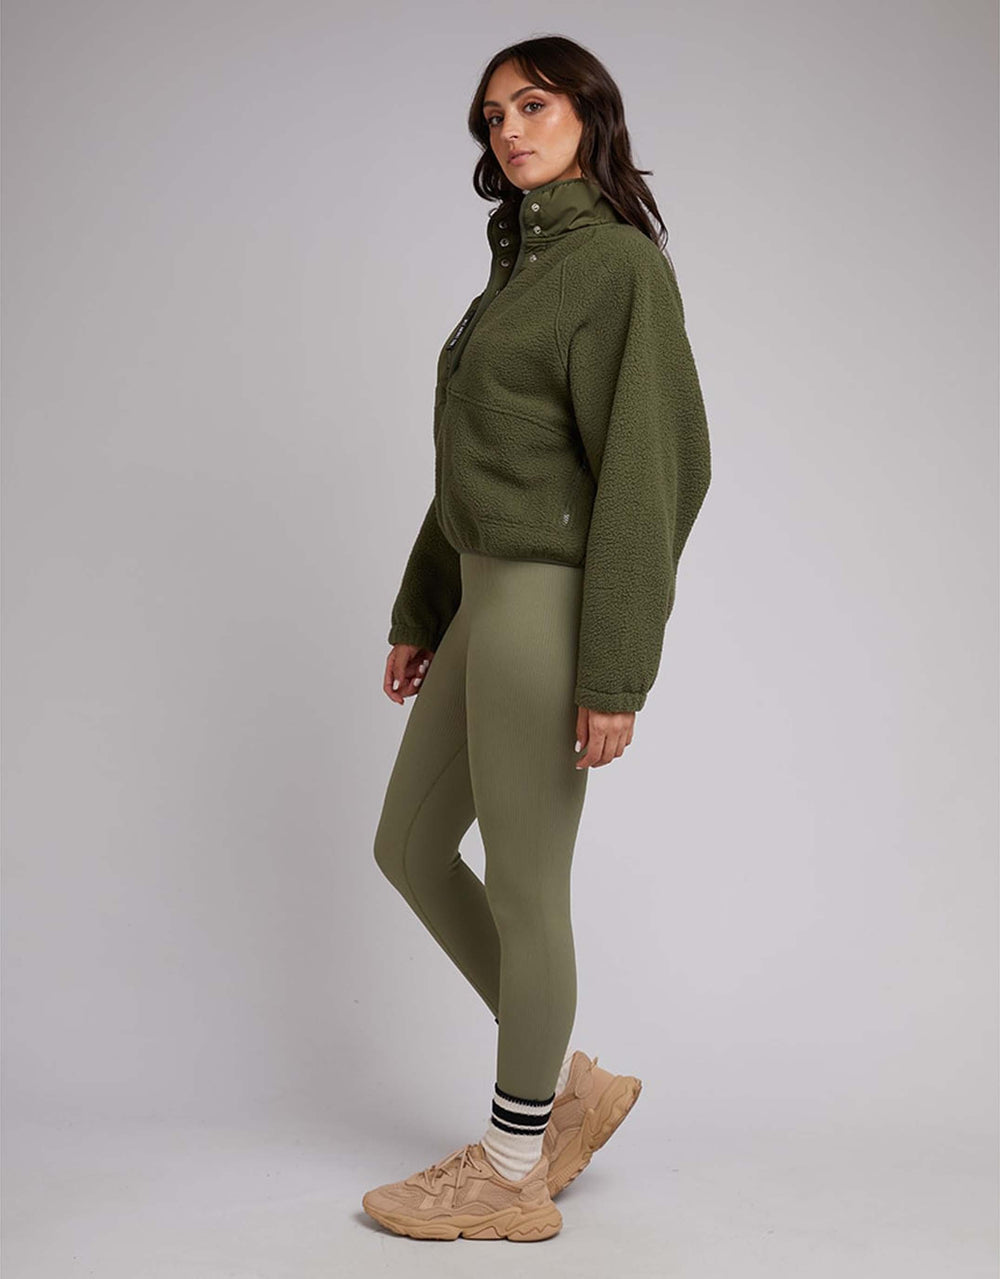 all-about-eve-active-teddy-zip-khaki-womens-clothing